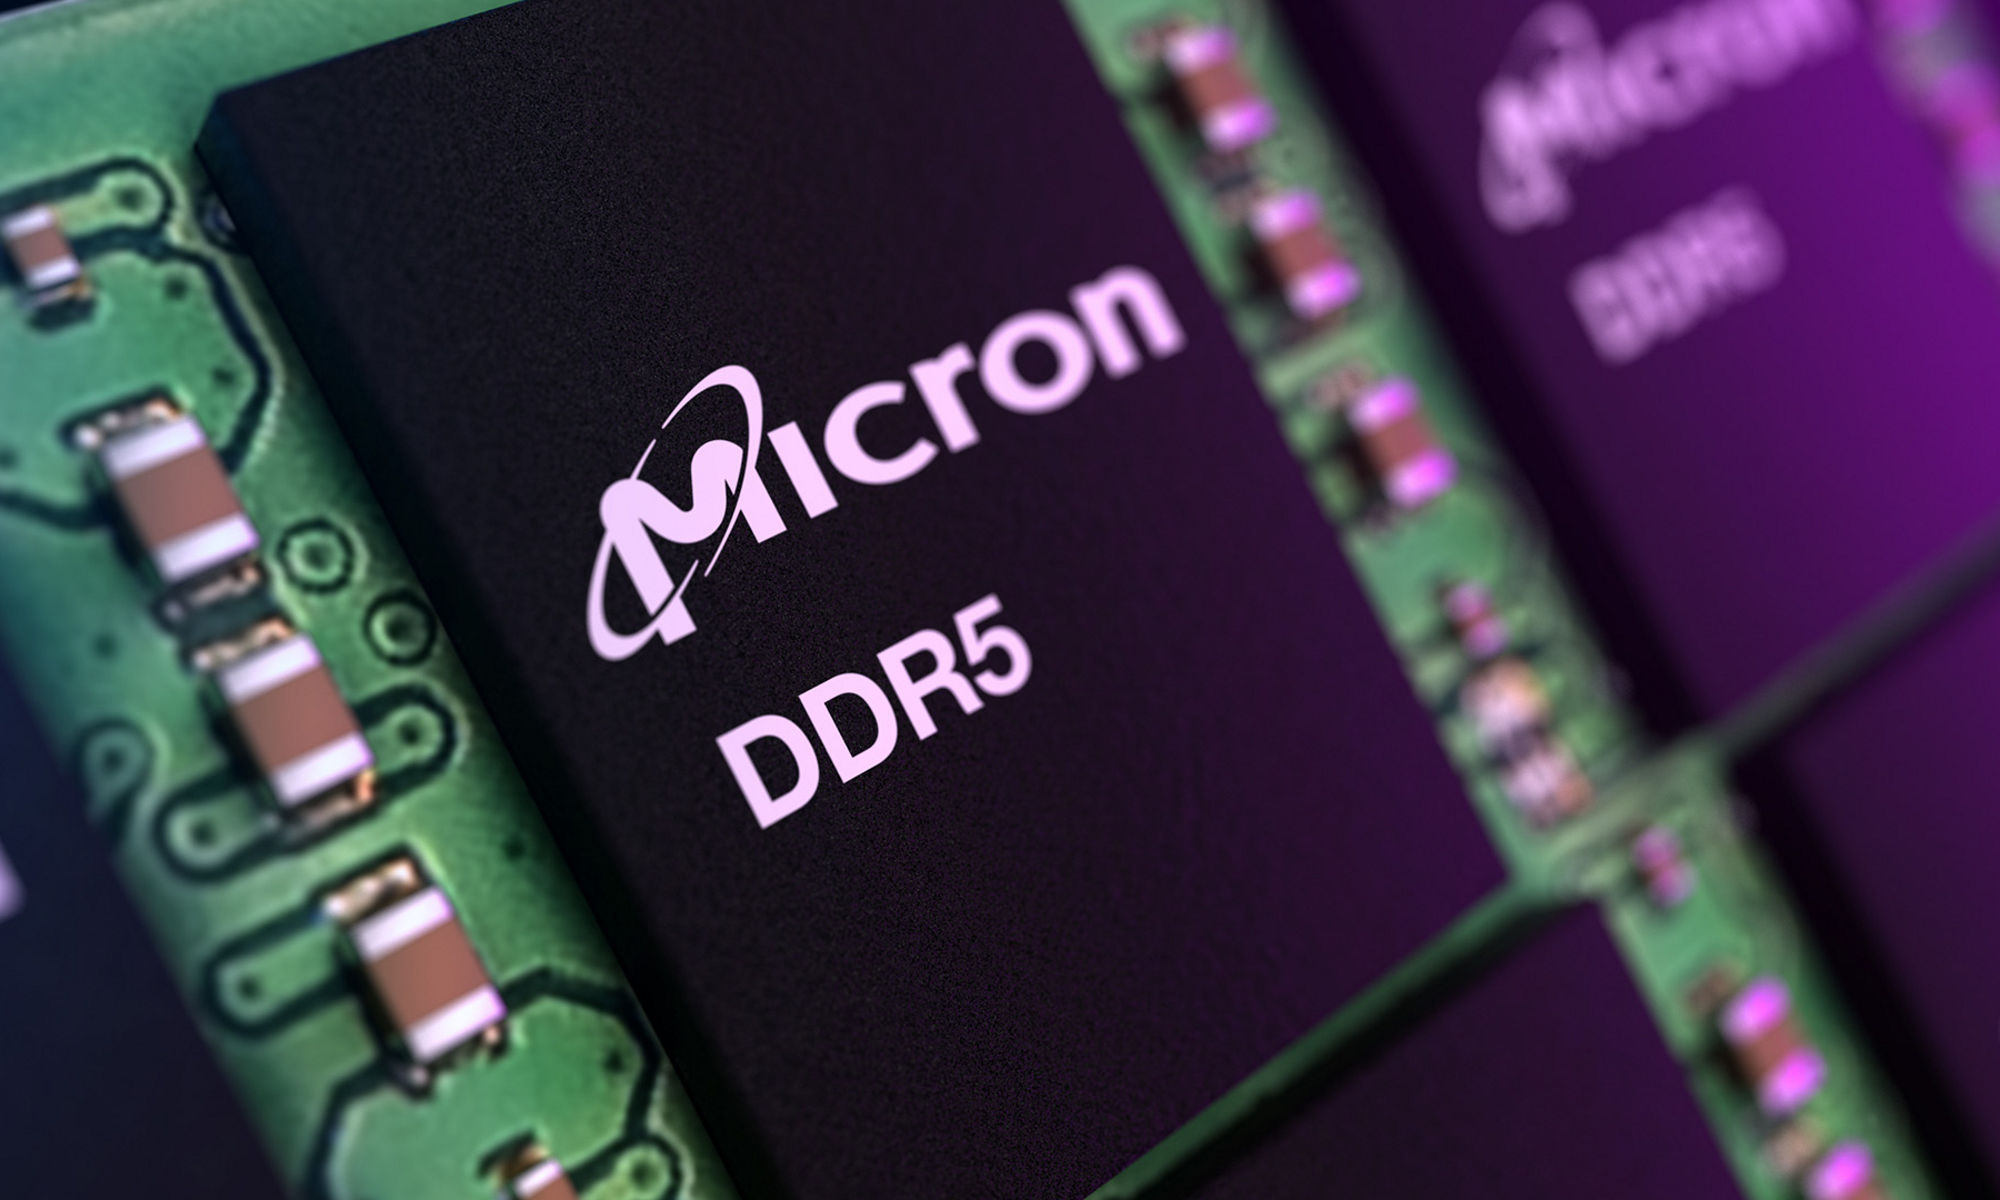 Micron DDR5 component